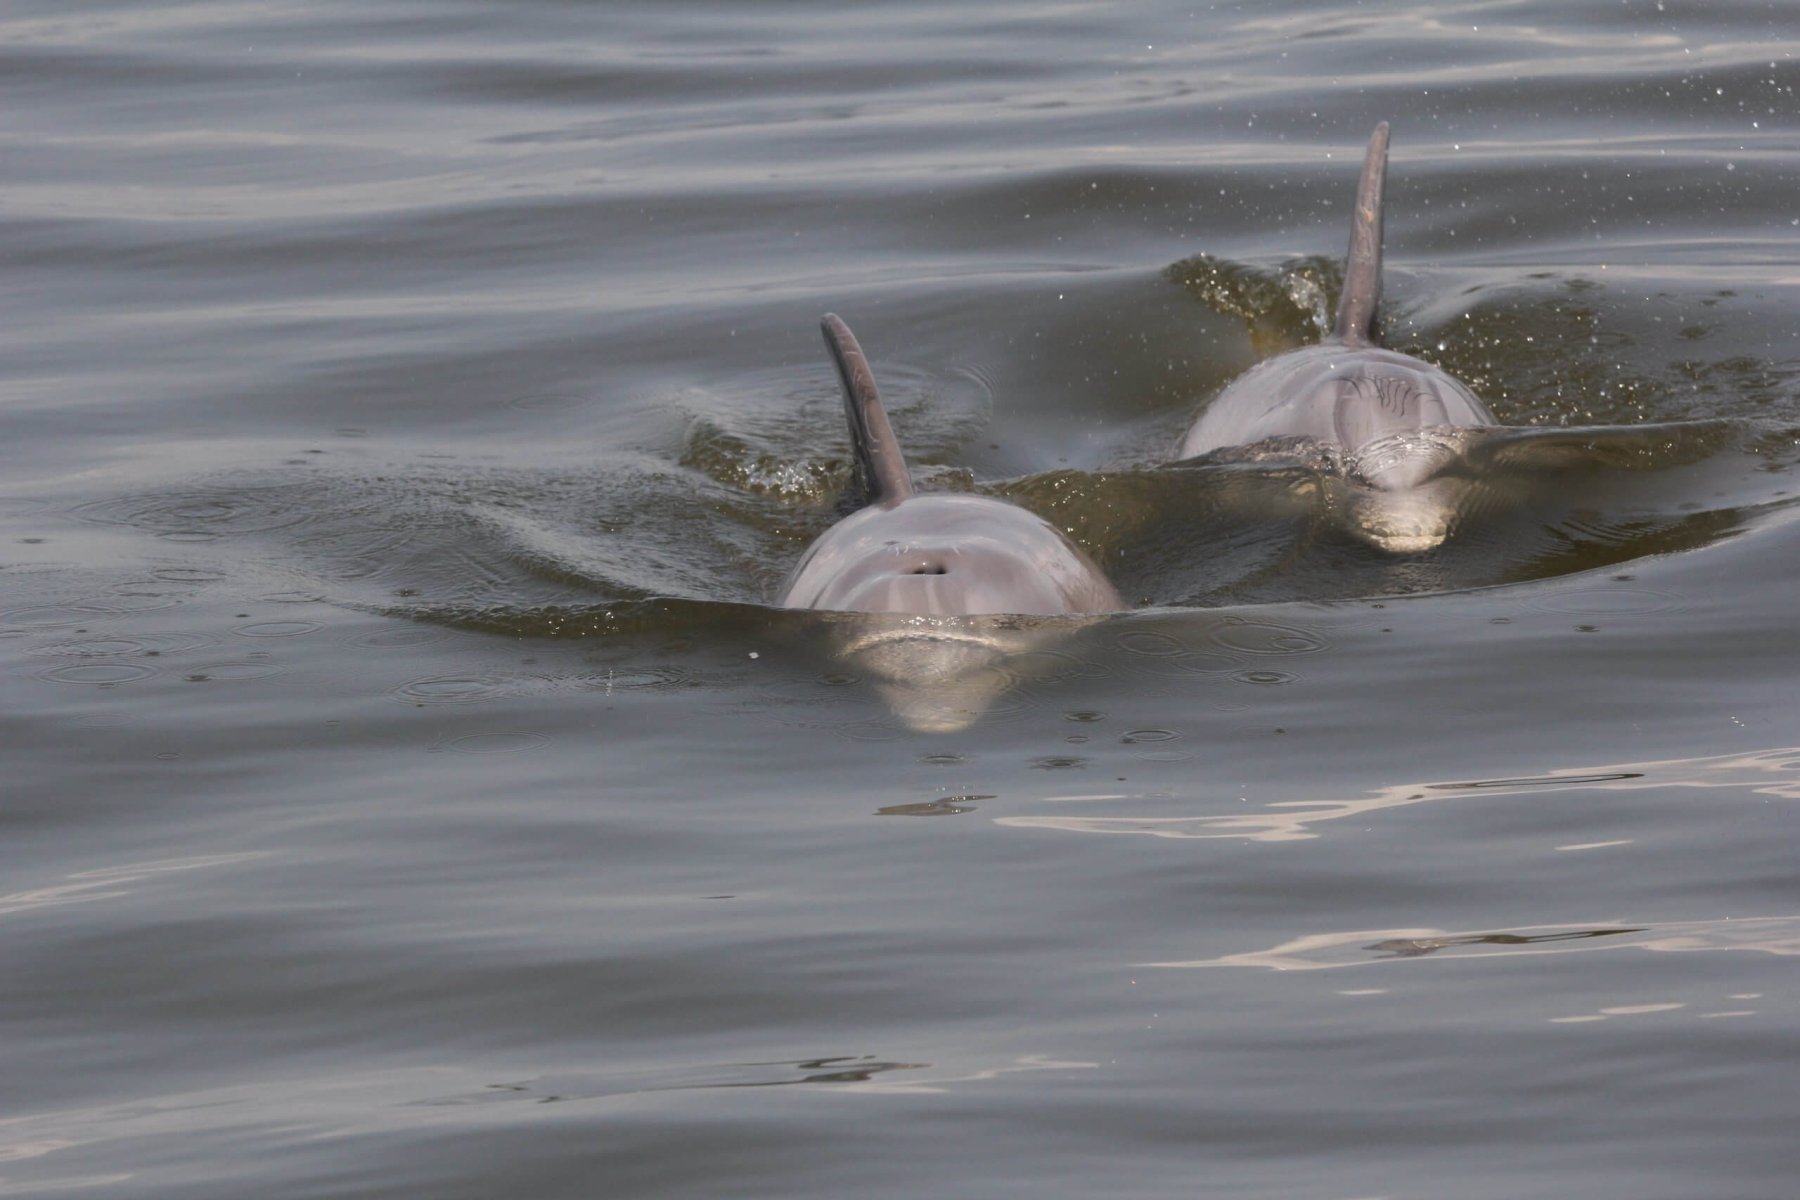 Two Barataria Bay bottlenose dolphins